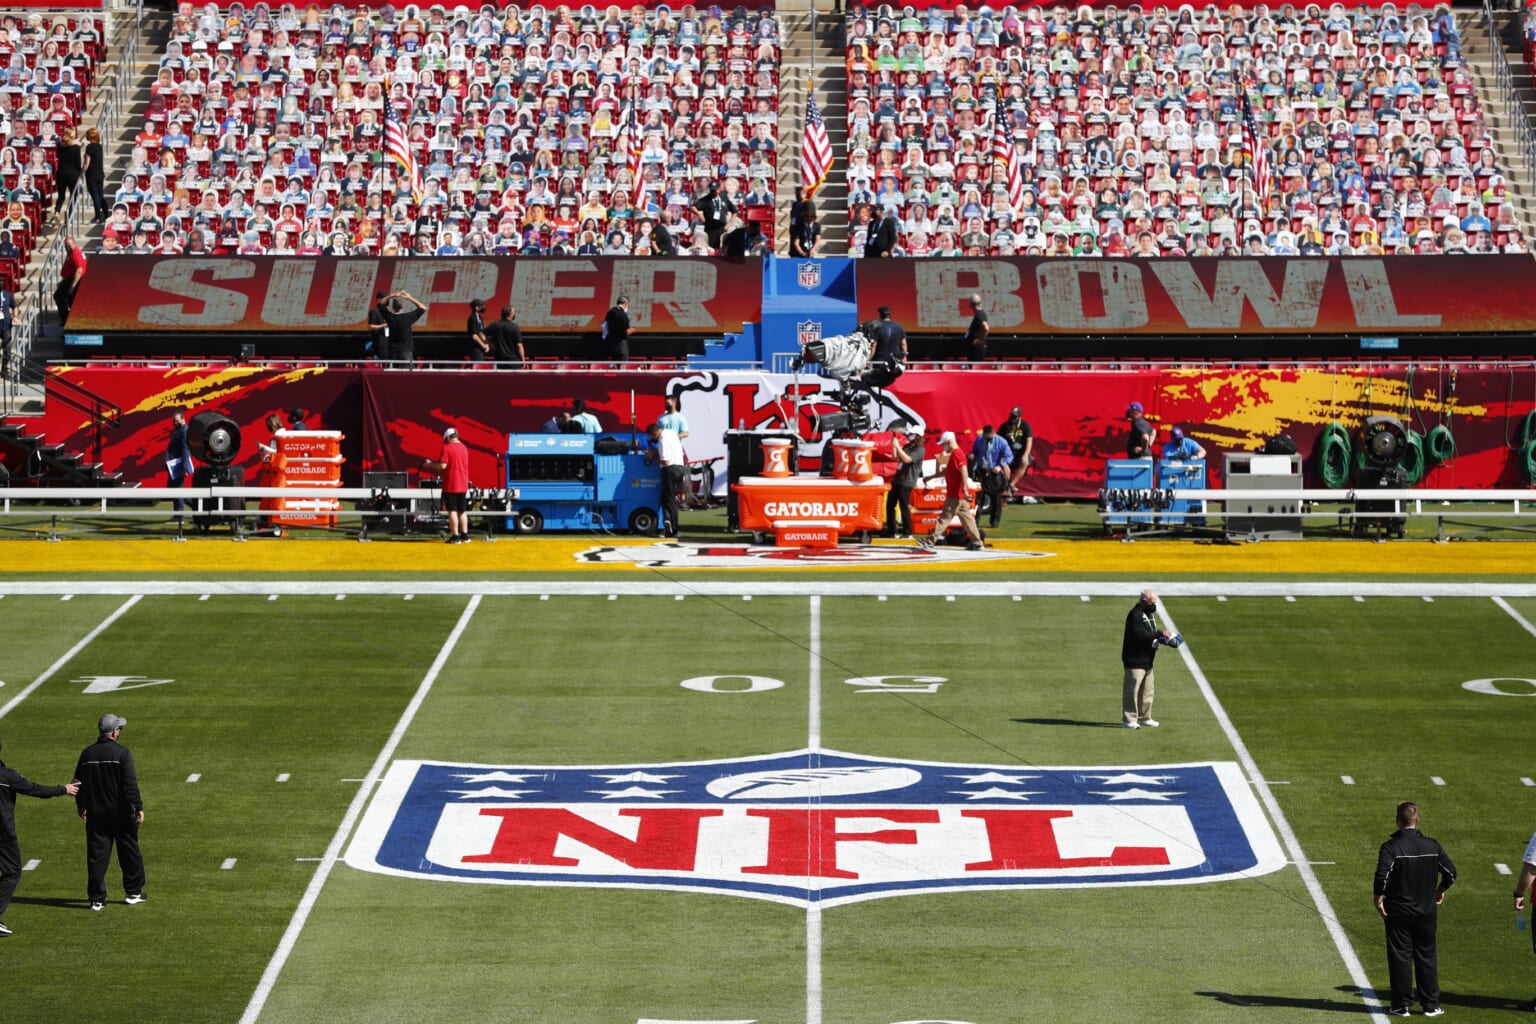 New NFL television contract is sweeping, huge changes in store with